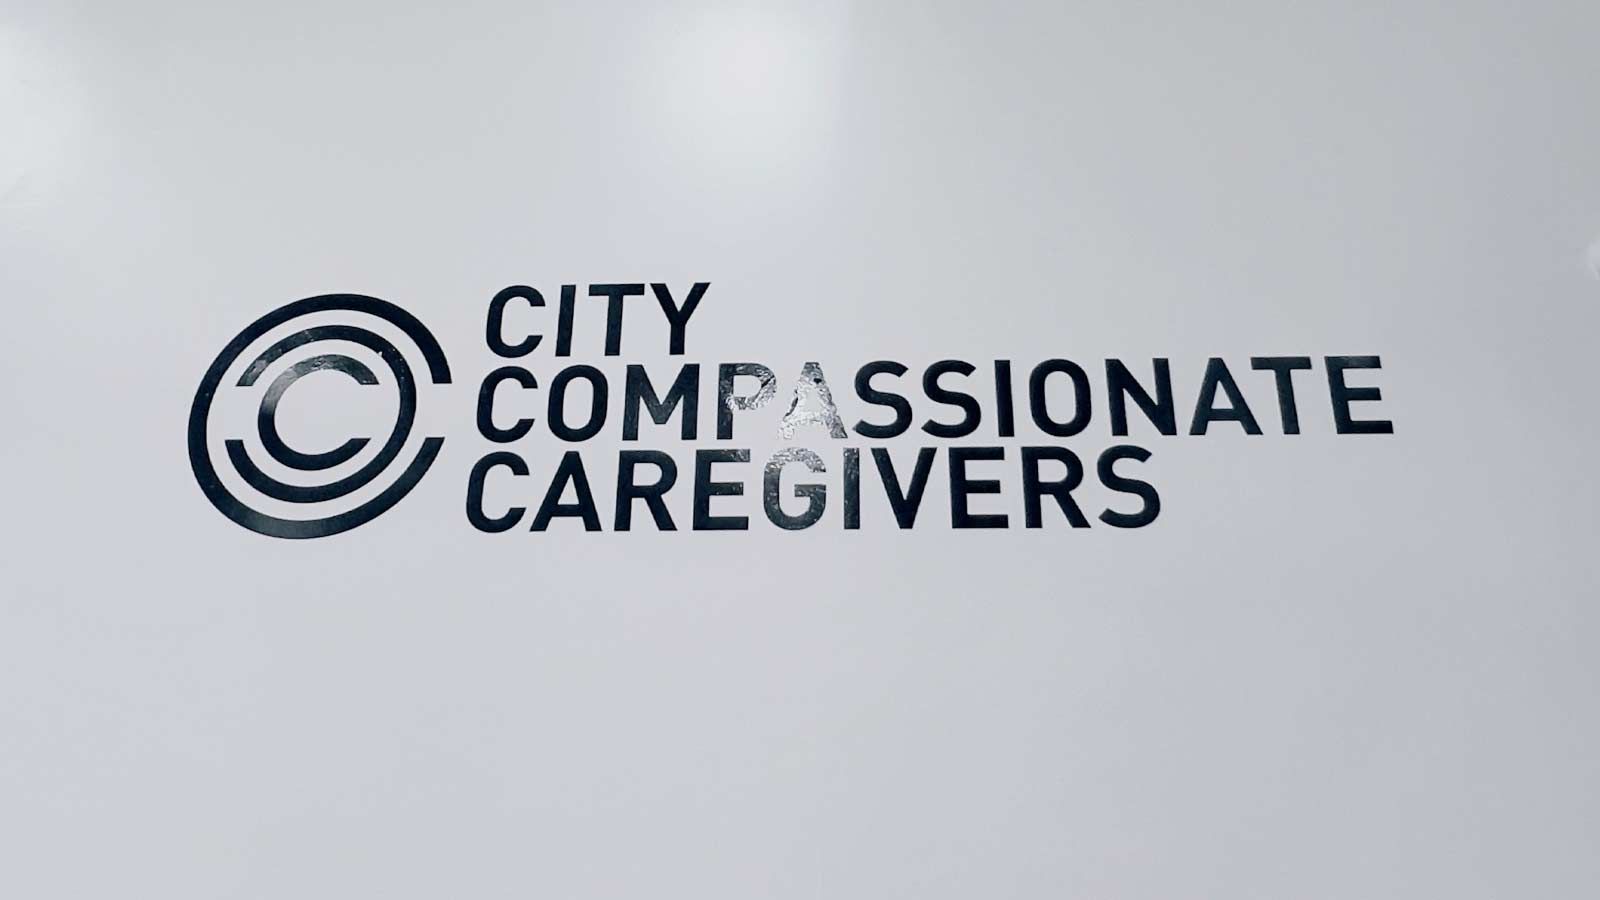 City Compassionate Caregivers vinyl lettering on the wall